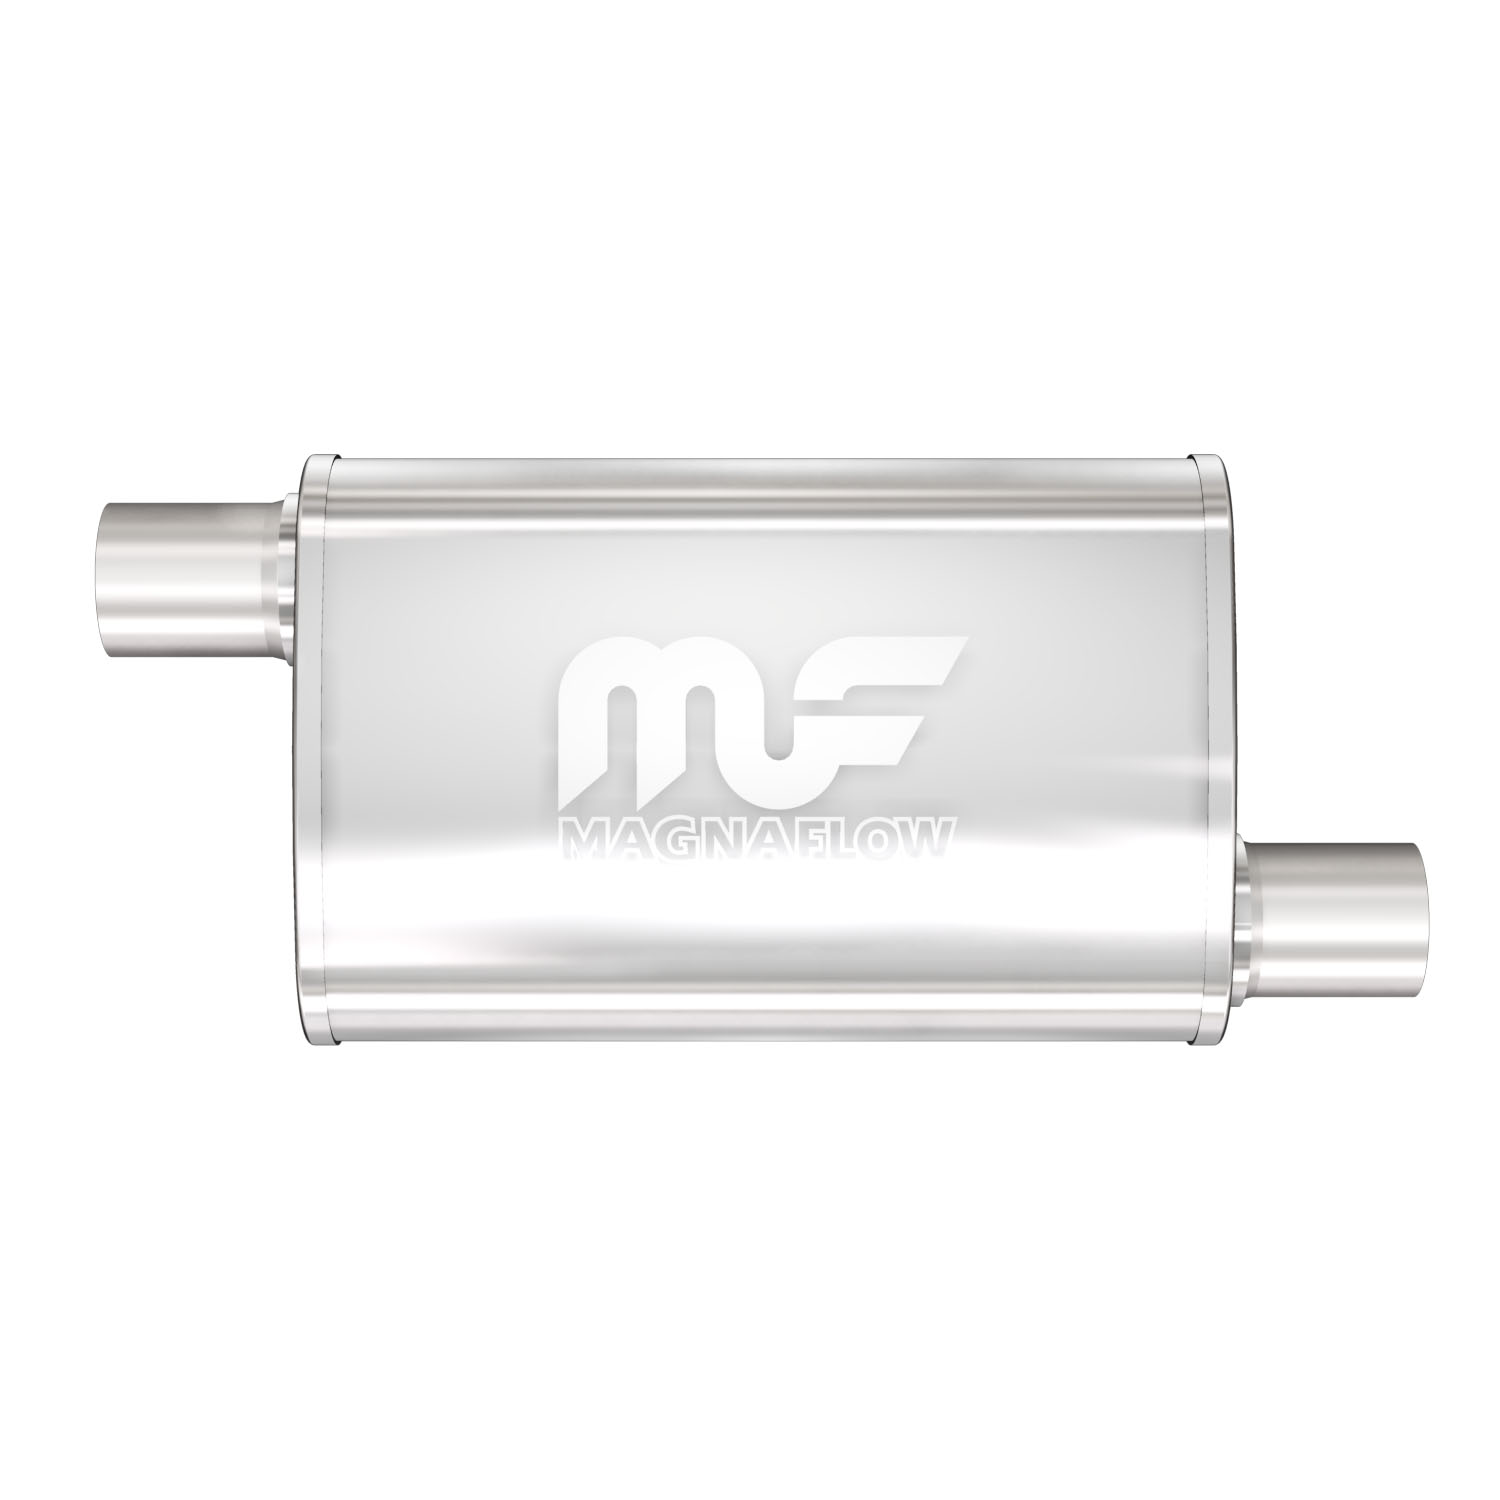 3.5" x 7" Oval Muffler Offset In/Offset Out: 1.75"/1.75" Body Length: 14" Overall Length: 20" Core Size: 2" Satin Finish